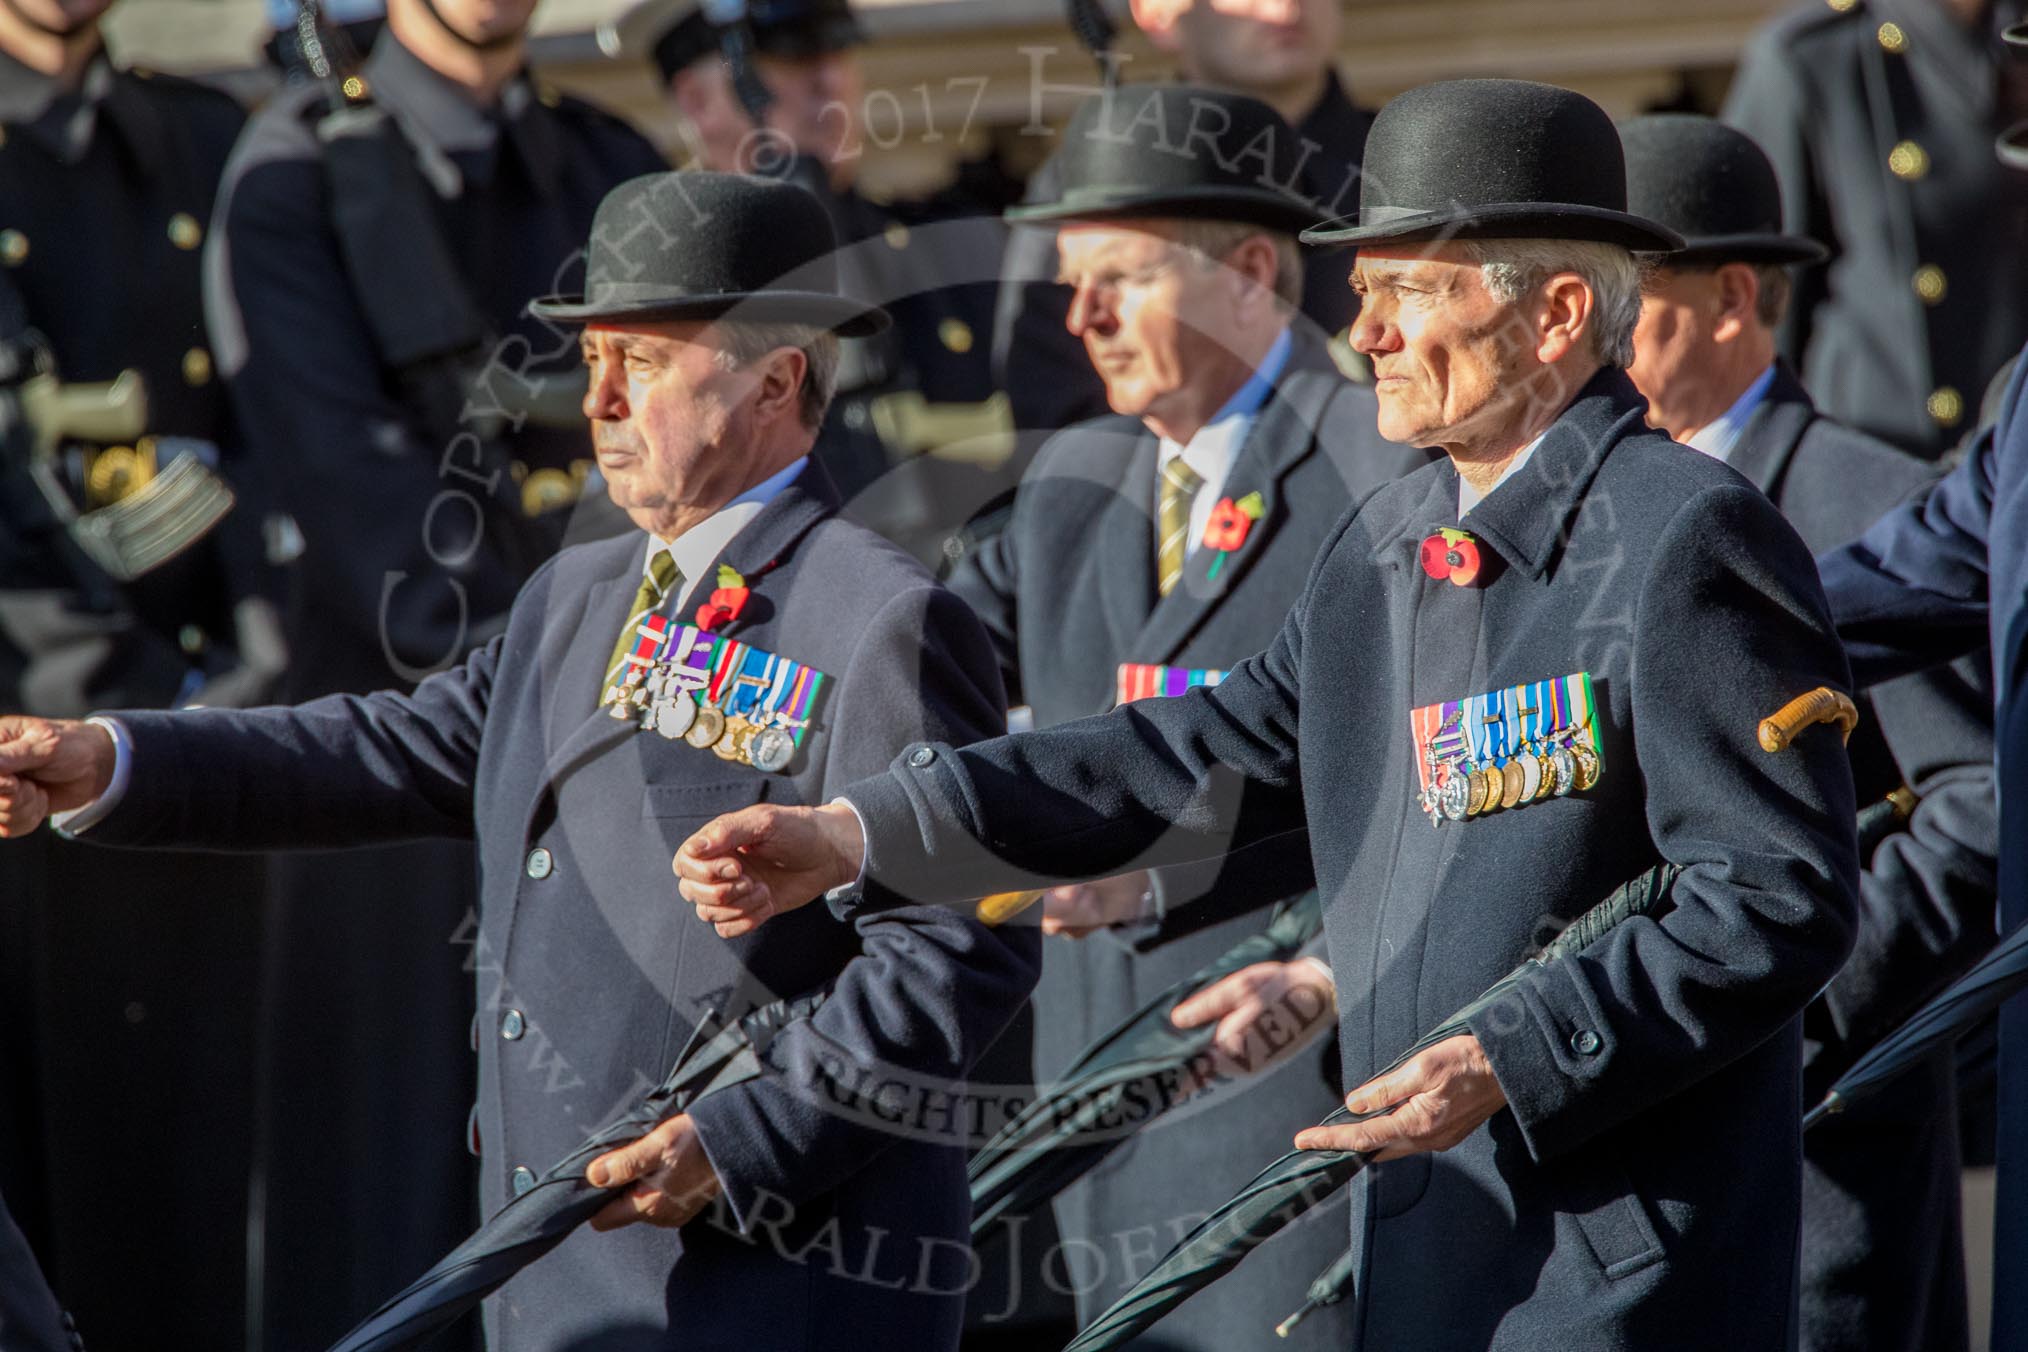 Green Howards Association (Group A22, 35 members) during the Royal British Legion March Past on Remembrance Sunday at the Cenotaph, Whitehall, Westminster, London, 11 November 2018, 11:59.